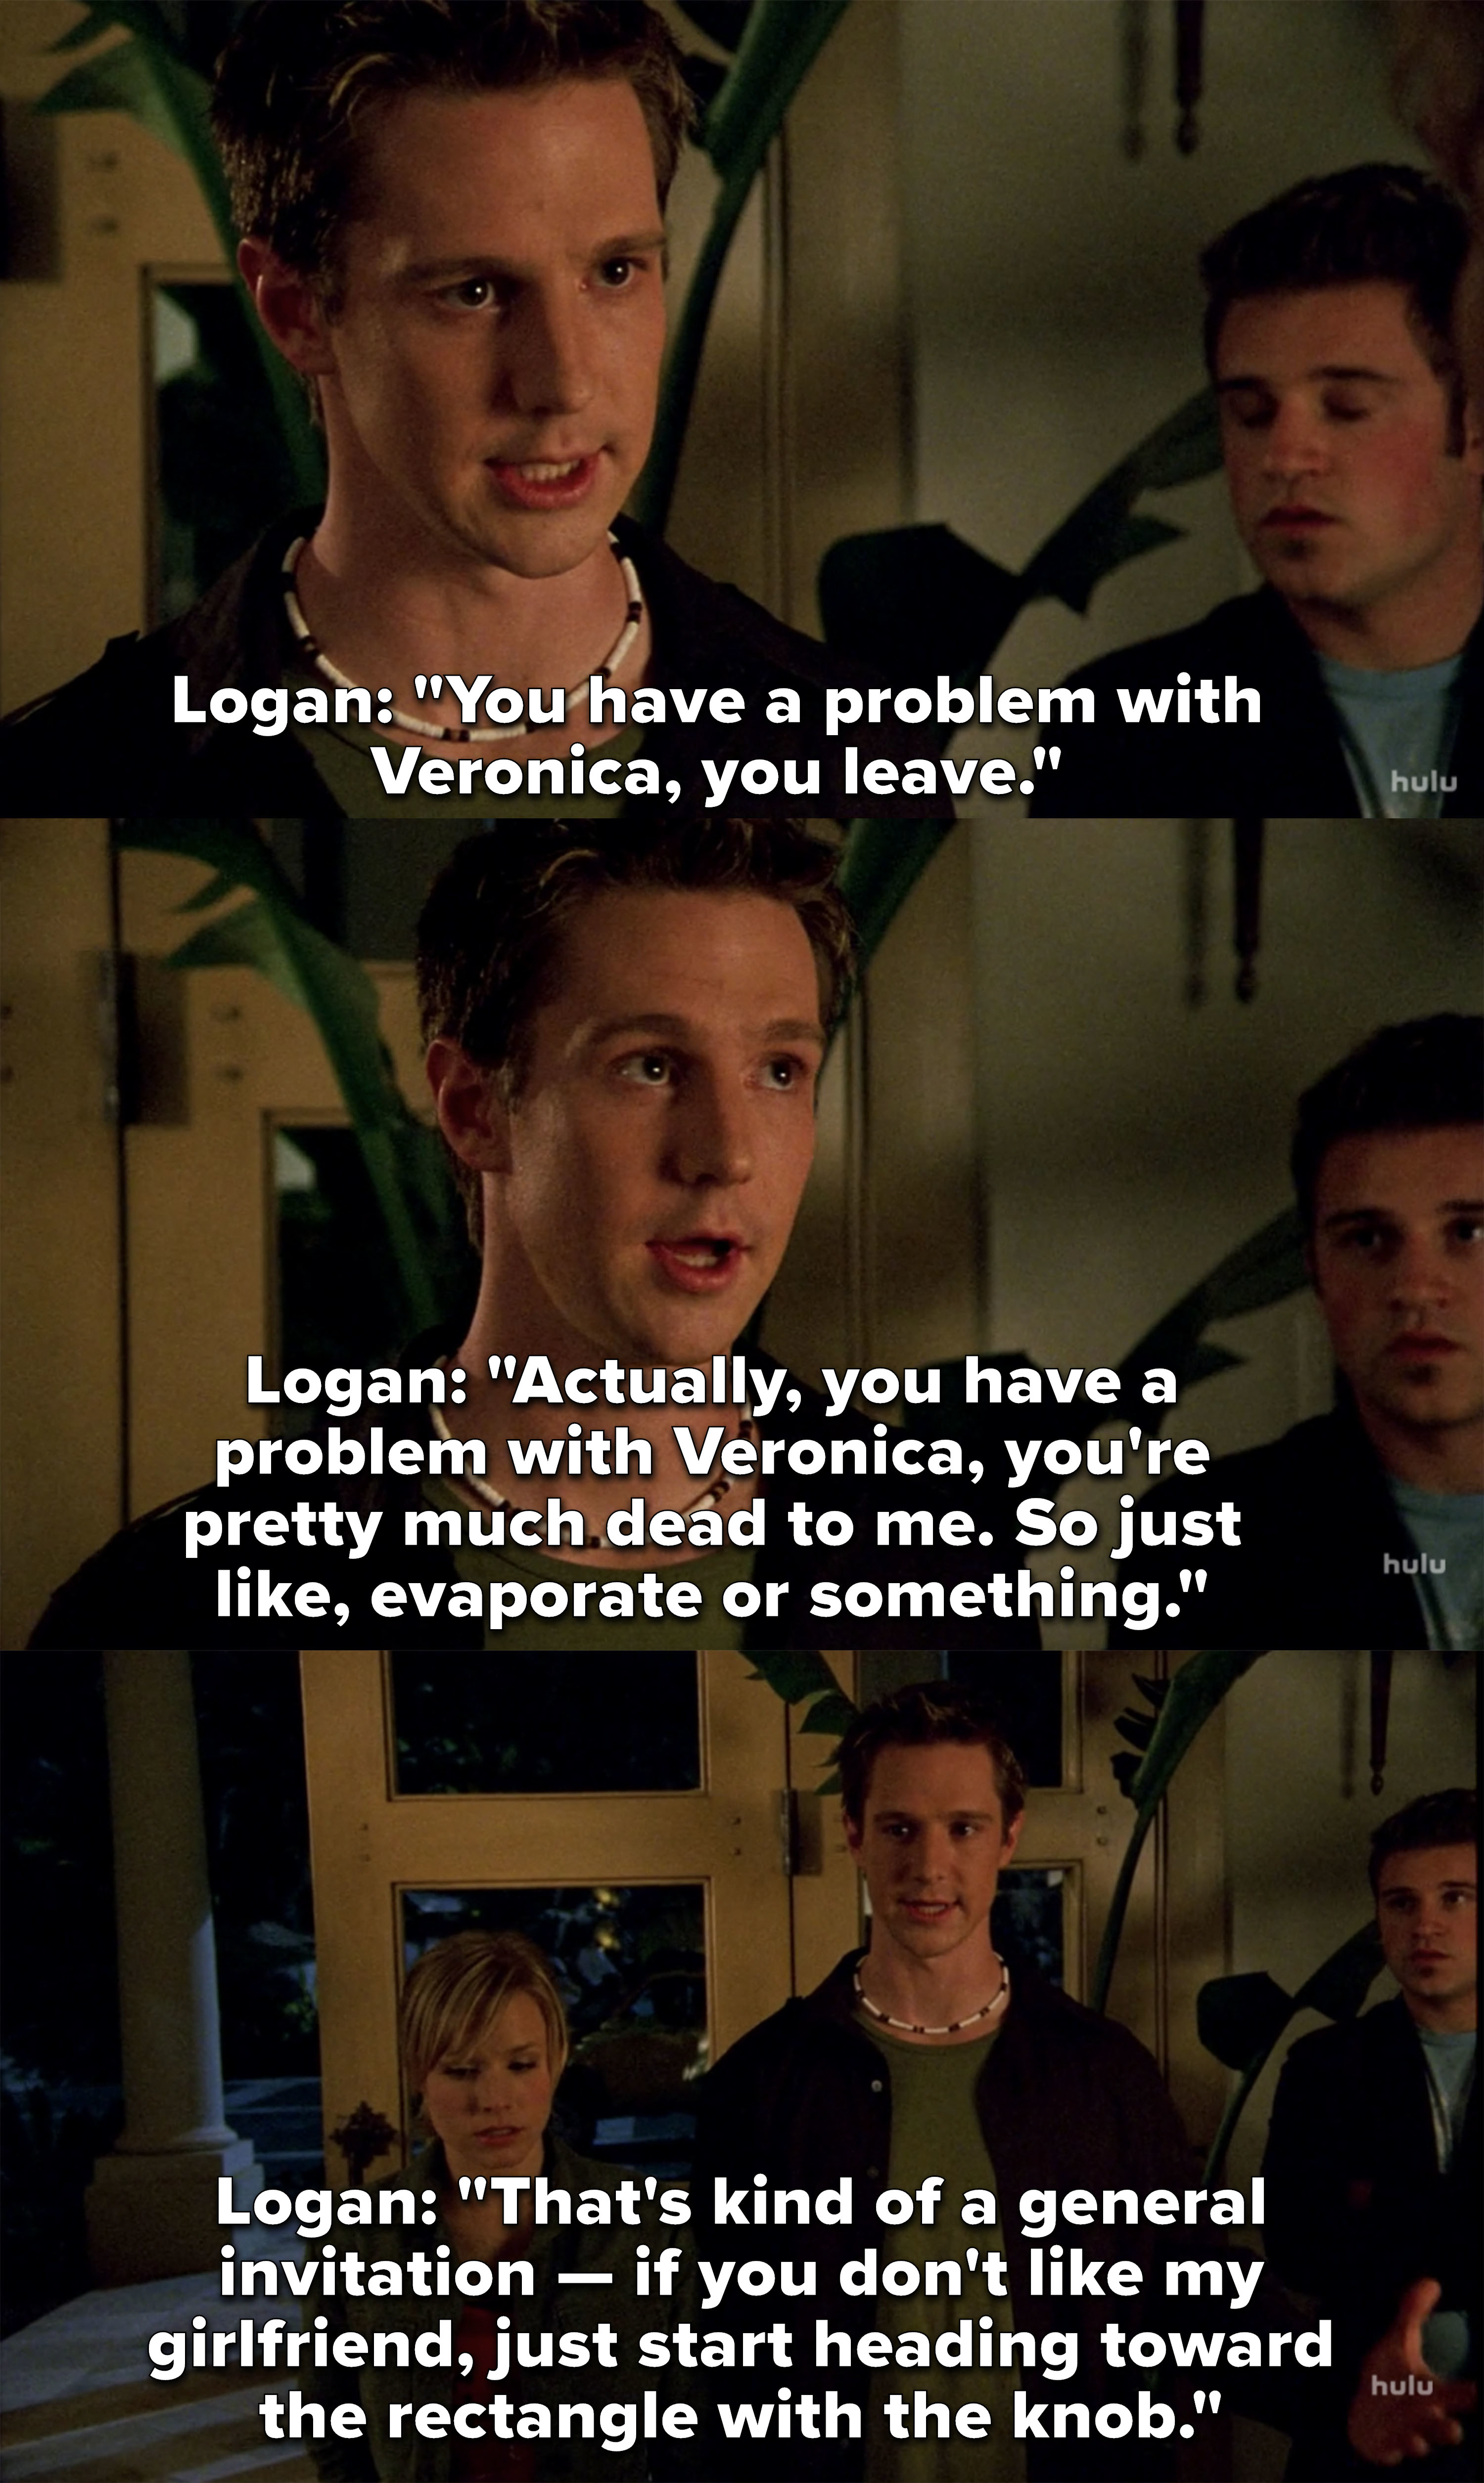 Logan: &quot;You have a problem with Veronica, you leave, you&#x27;re pretty much dead to me, so just like, evaporate&quot;